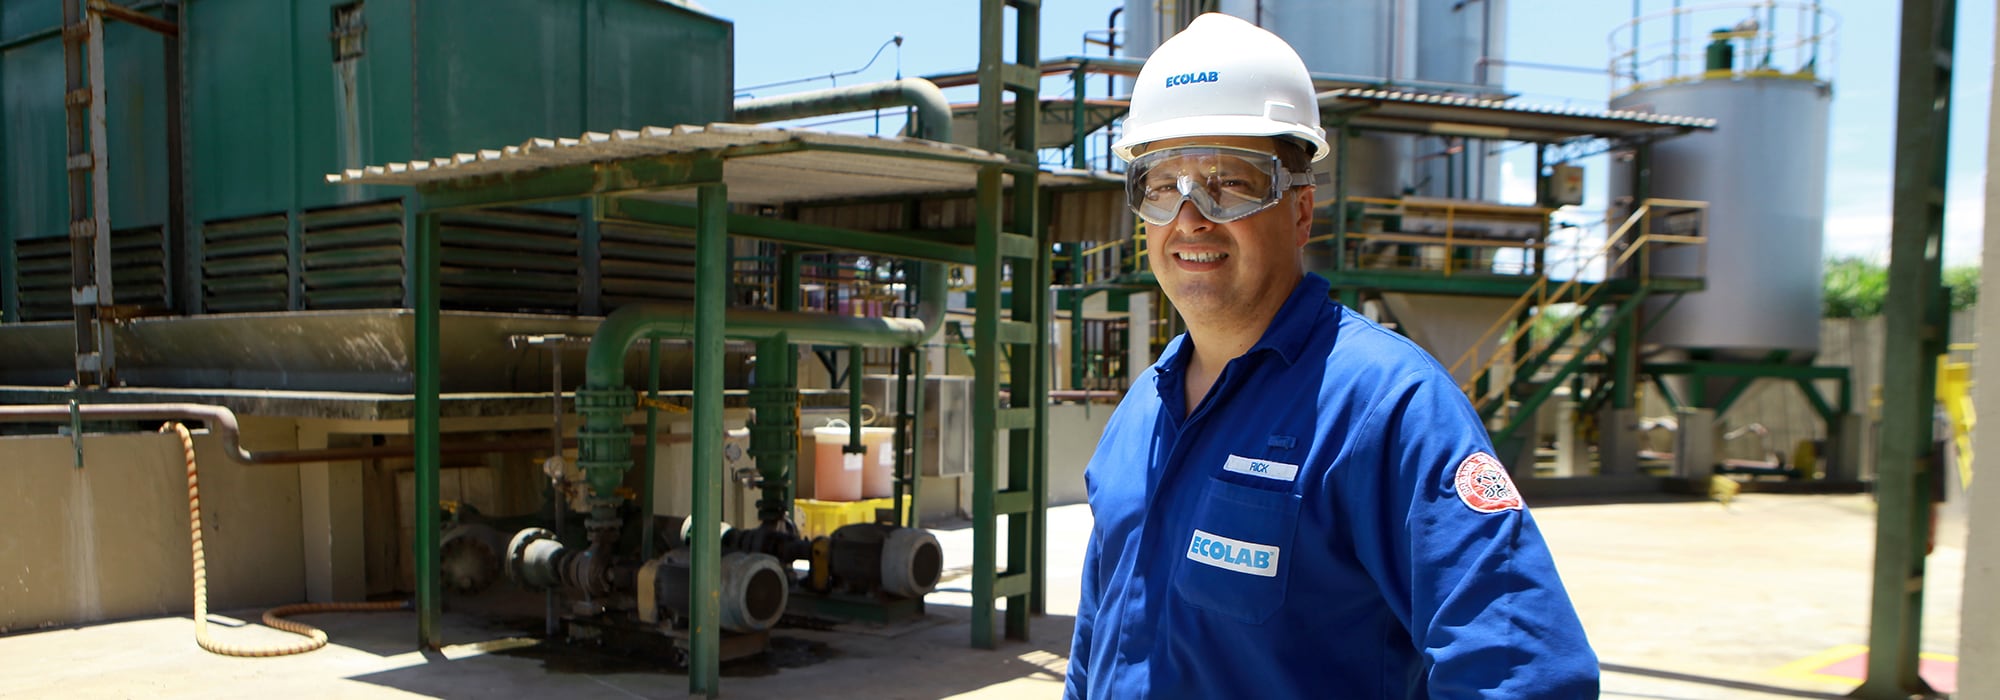 Employee at Ecolab’s Suzano, Brazil Plant